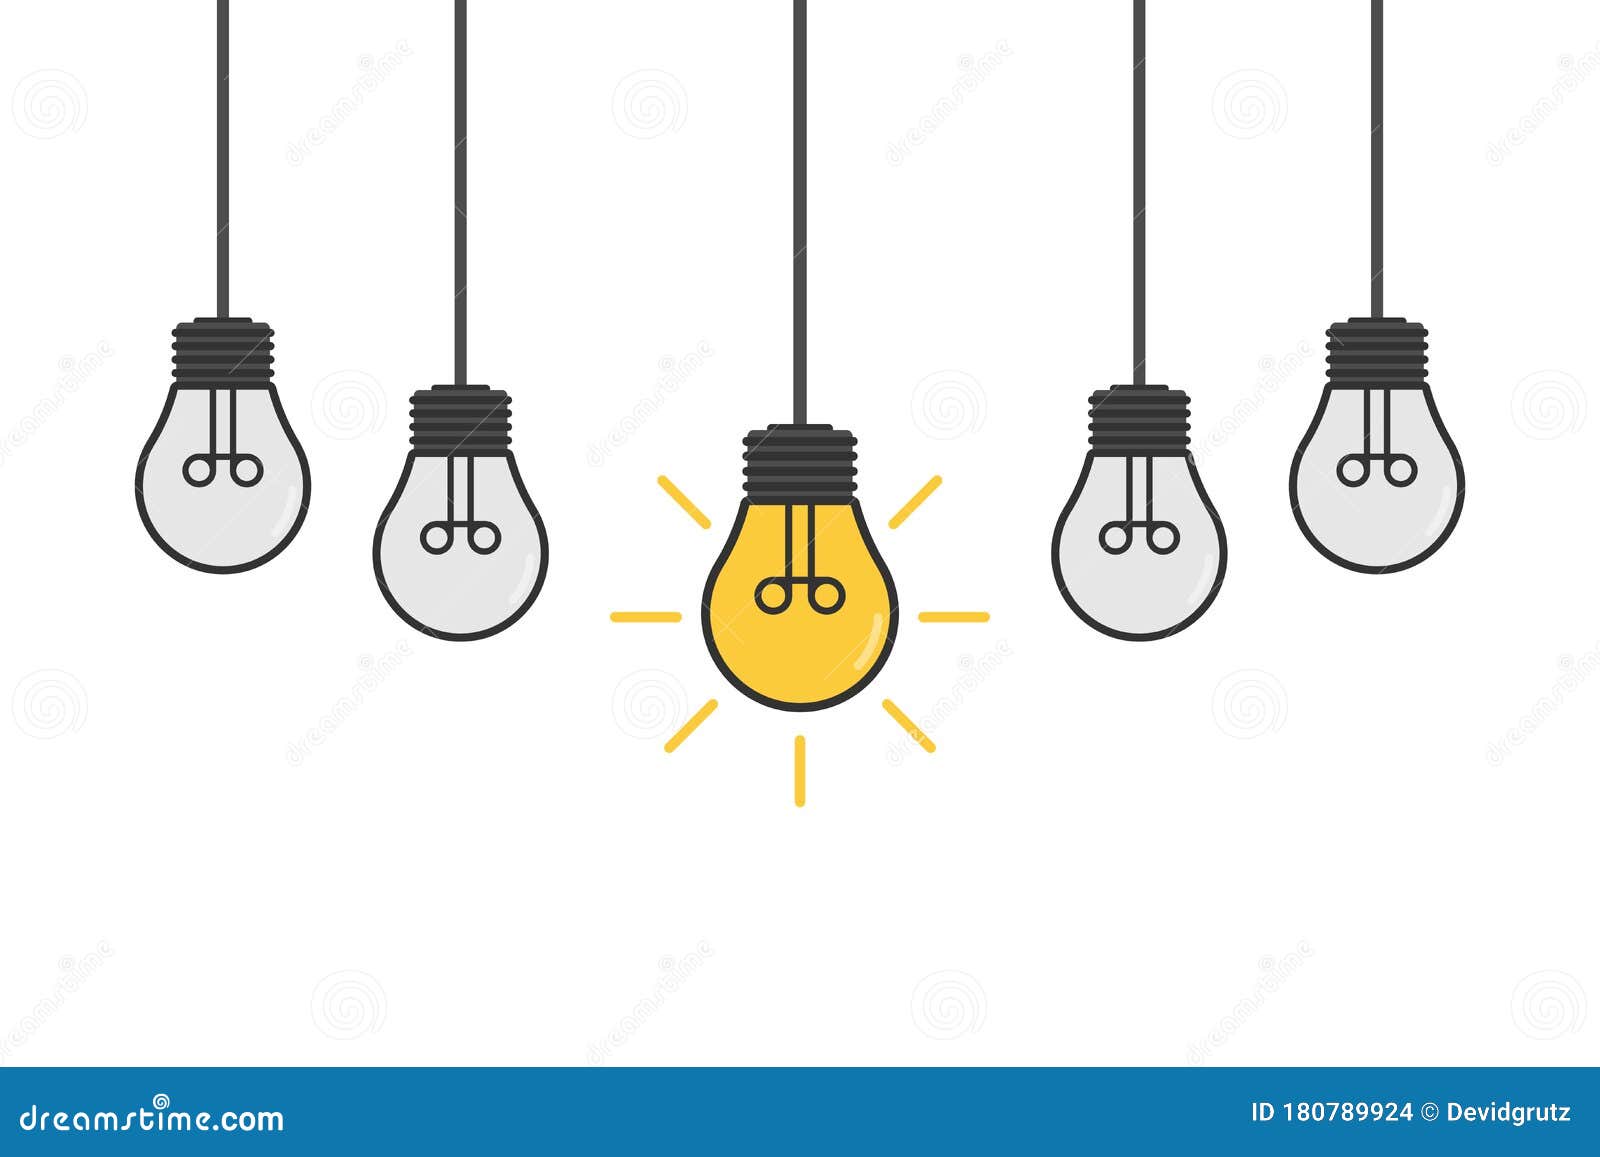 Cartoon Lamps. Bulb Light Icon - Idea Sign, Solution. Electricity, Shine  Stock Vector - Illustration of button, cute: 180789924